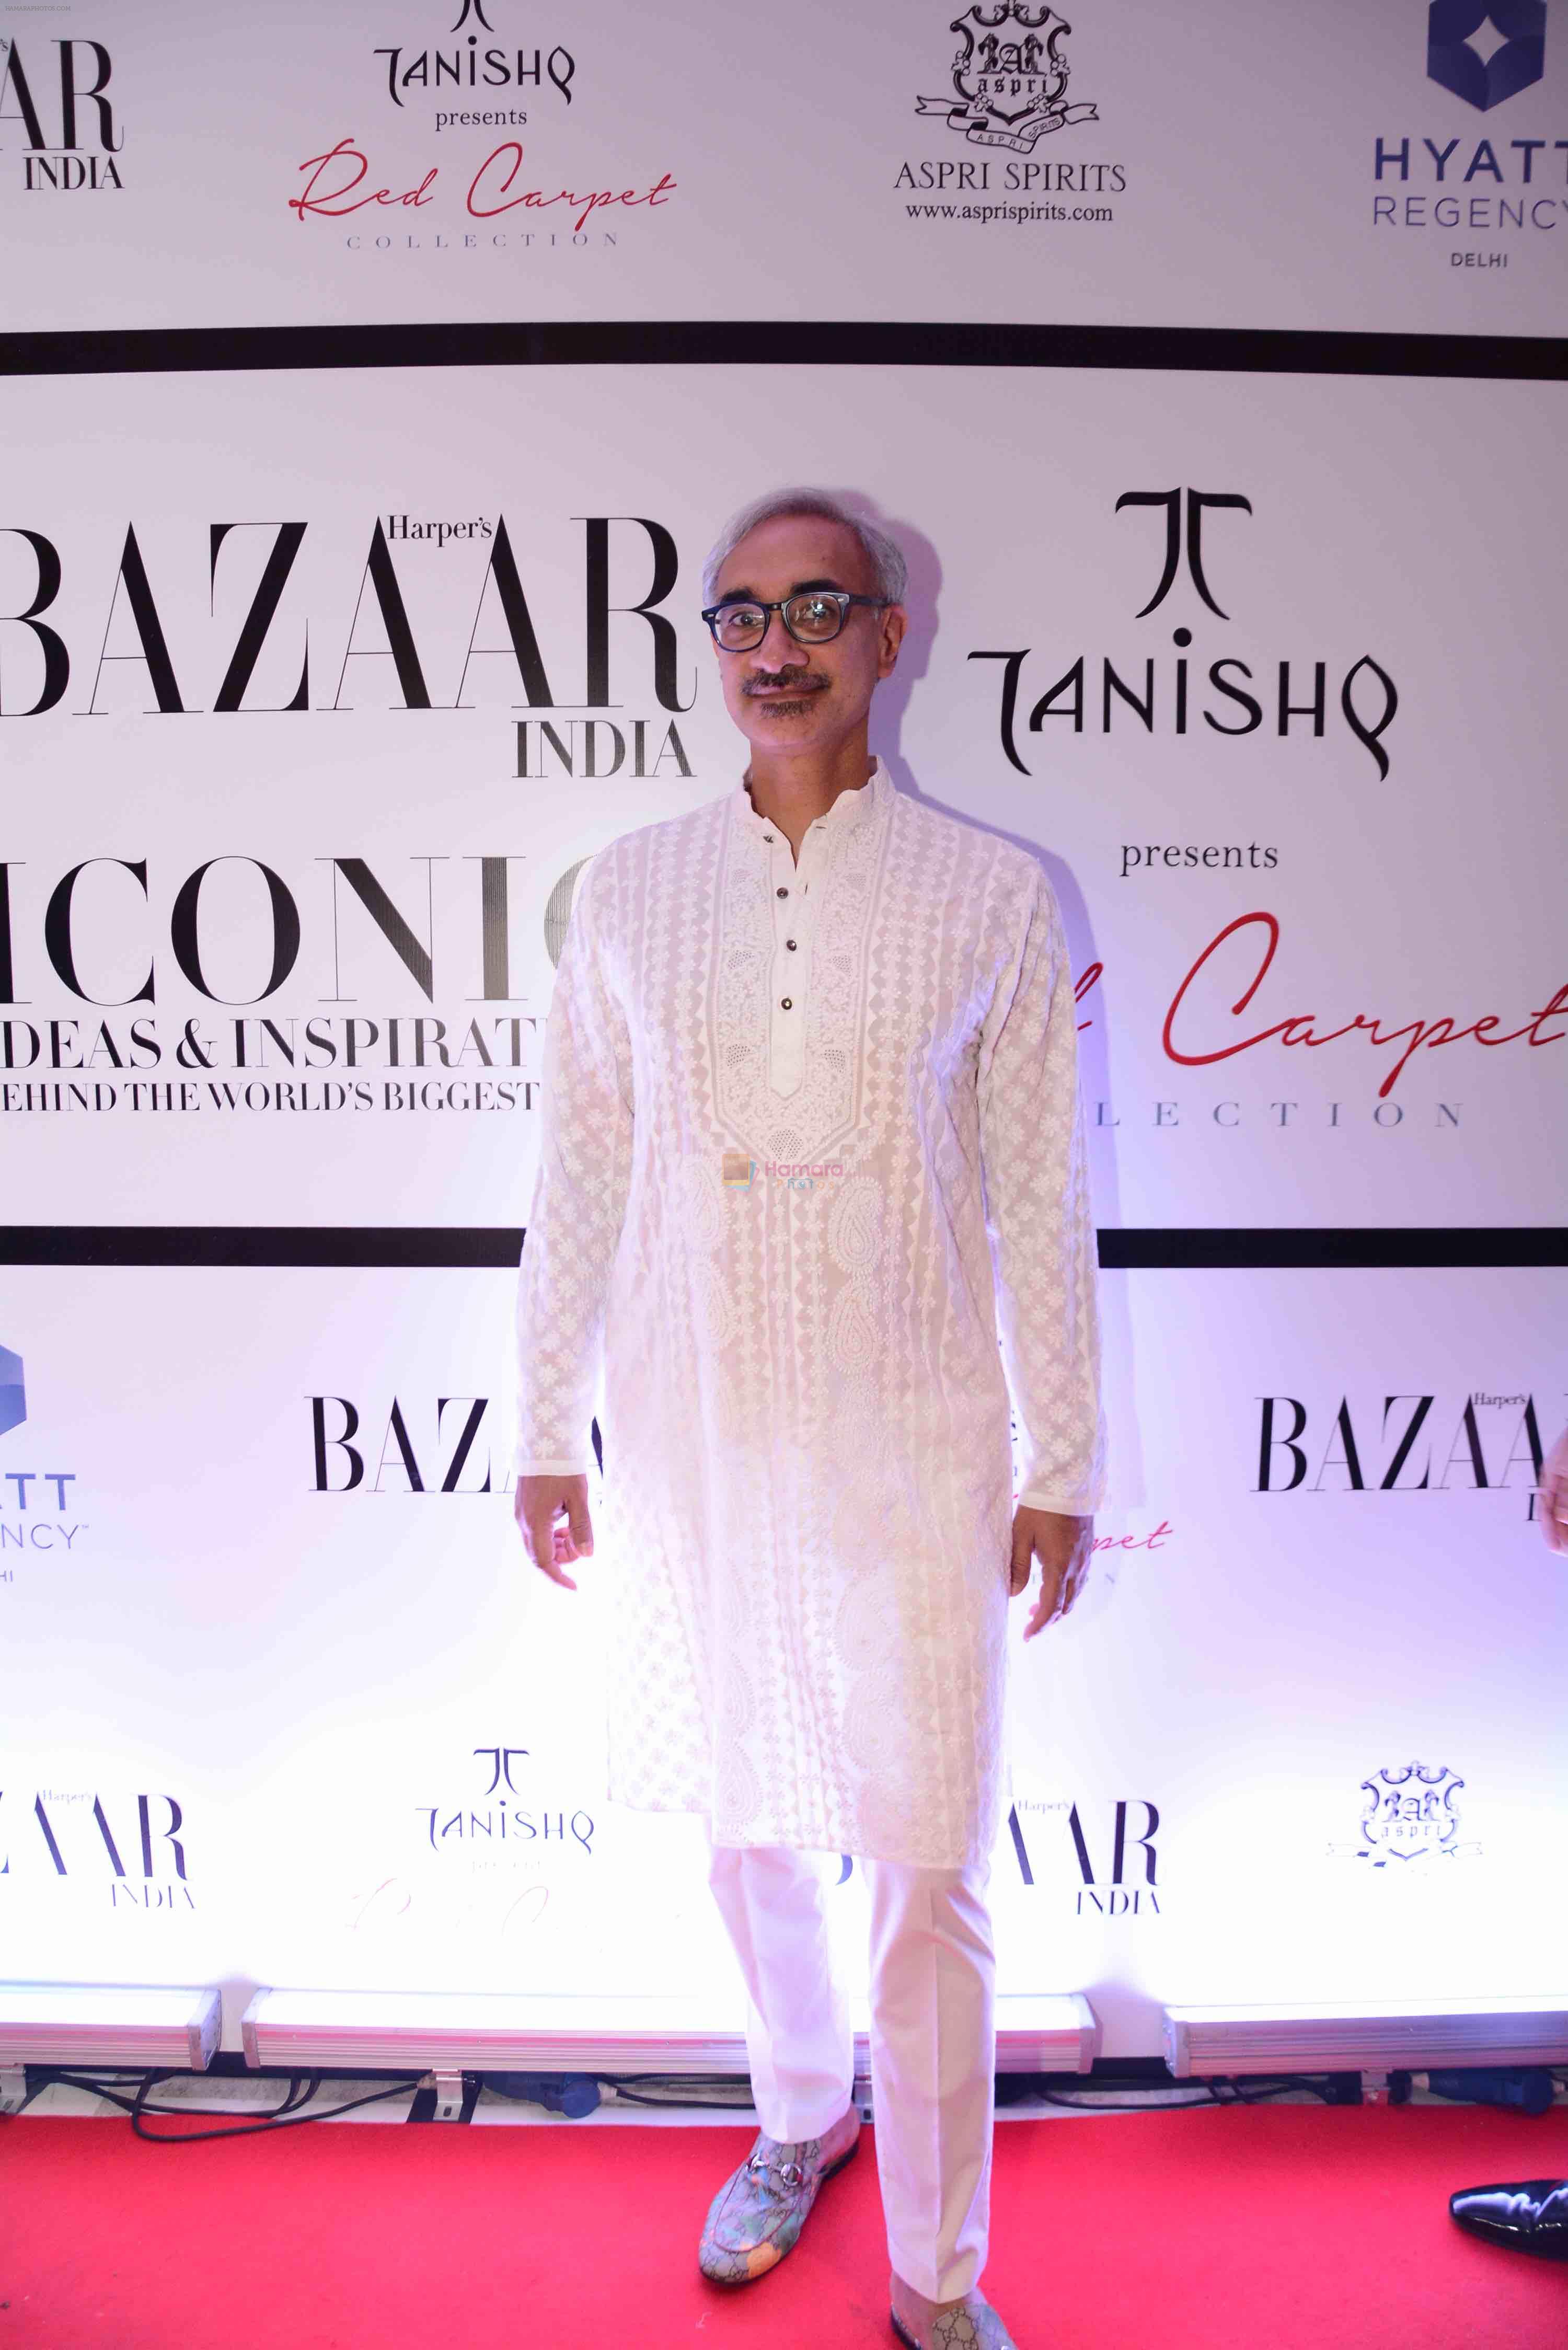 Ravi Bajaj at the launch of The Iconic Book in Delhi on 10th May 2017